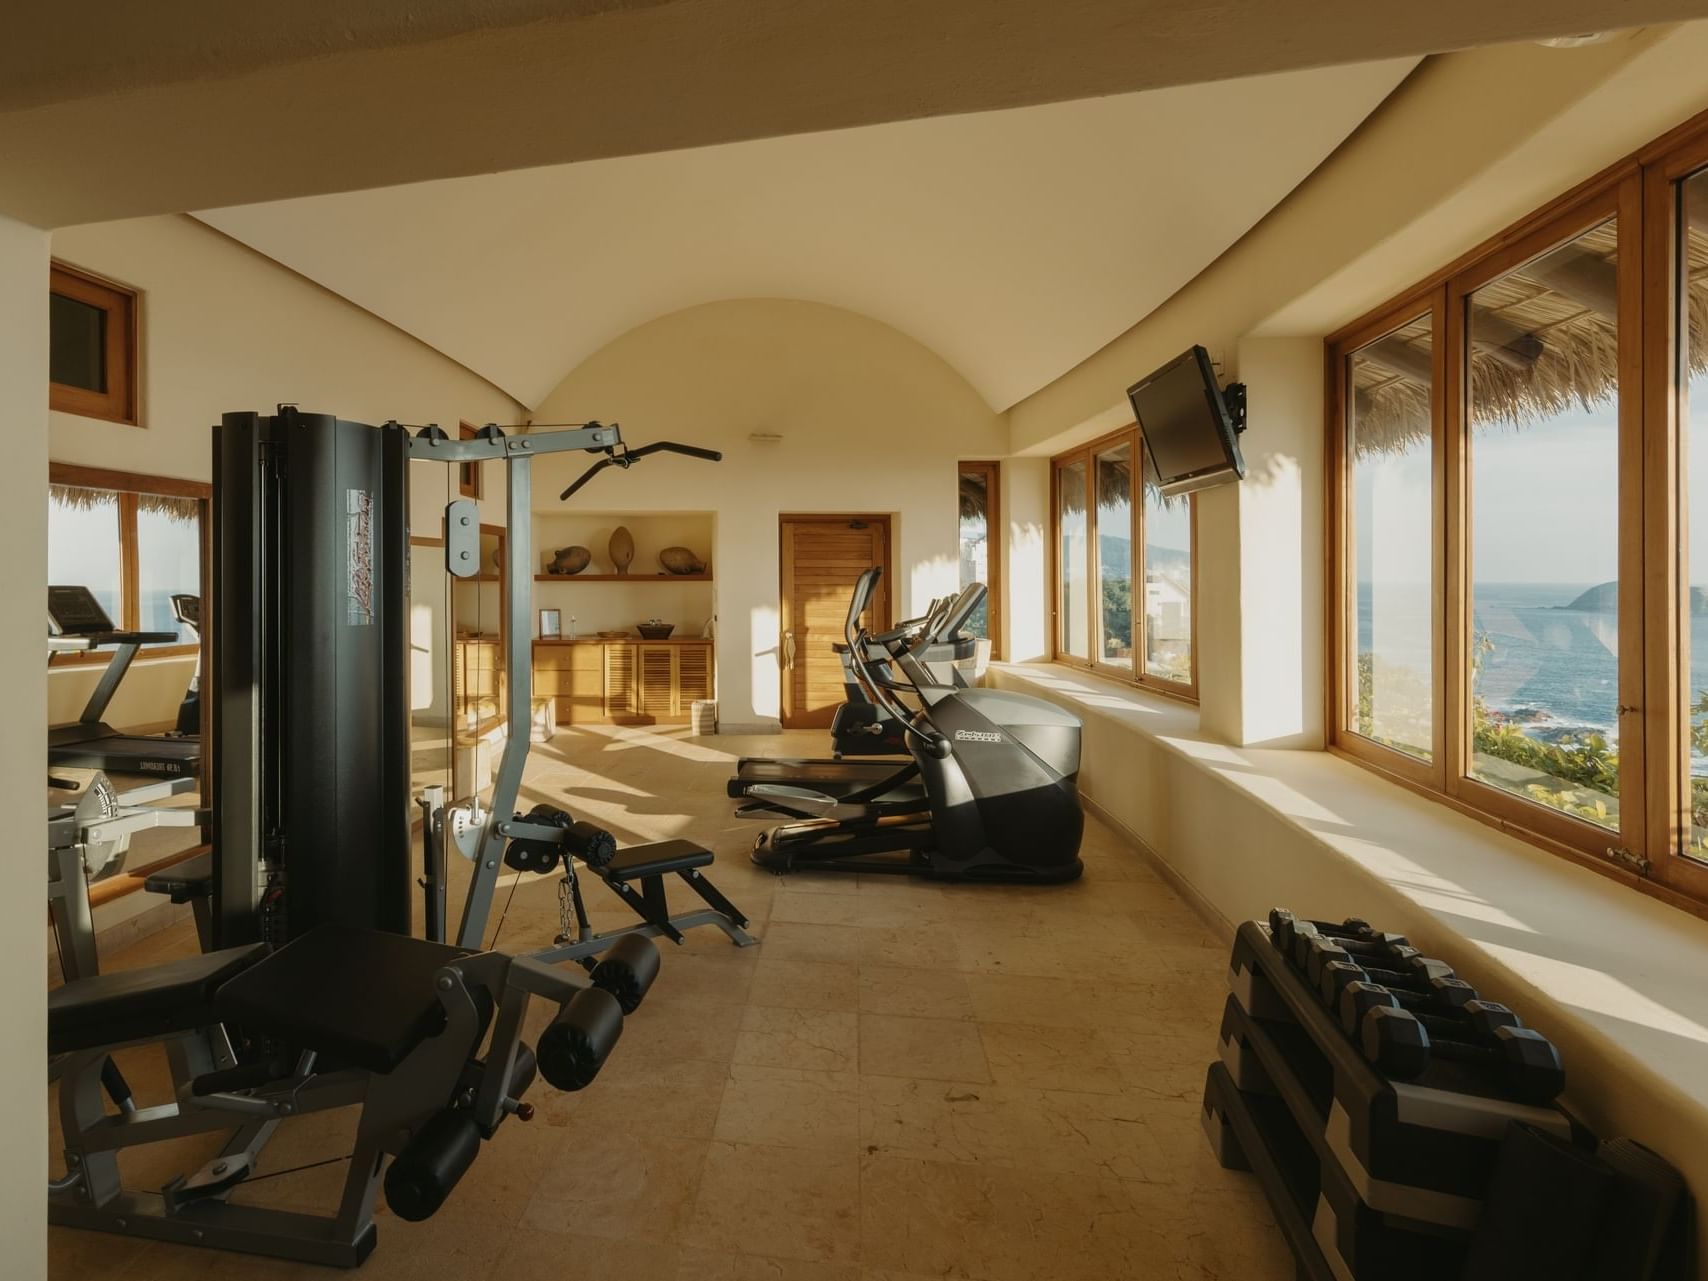 Fully equipped gymnasium with outdoor view, Cala de Mar Resort